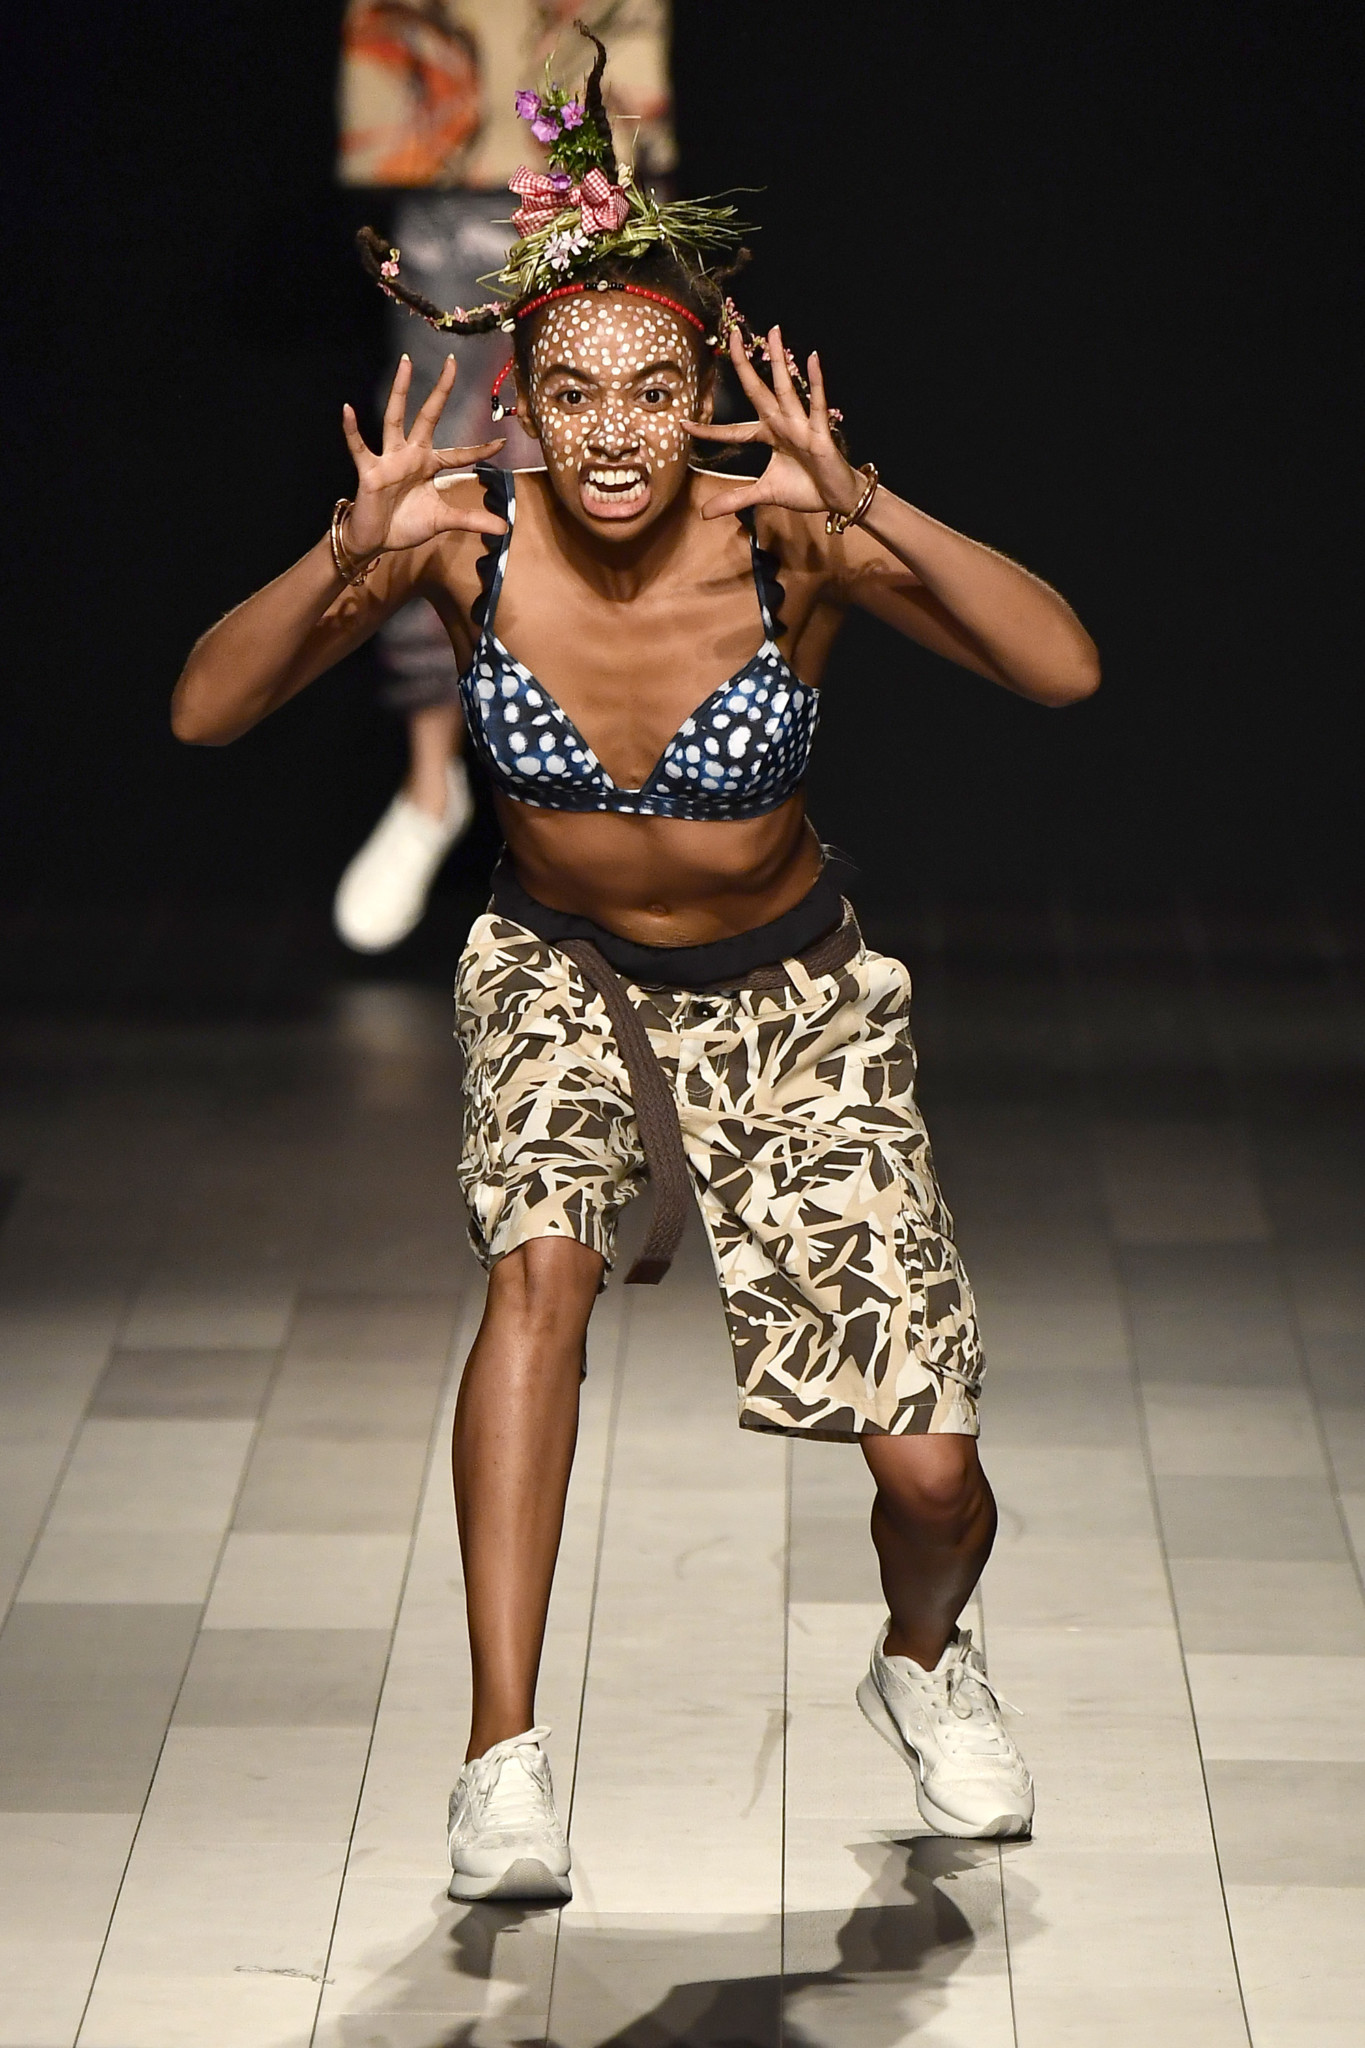 Desigual's Quirky Catwalk Show at #NYFWSS18 stole our Hearts